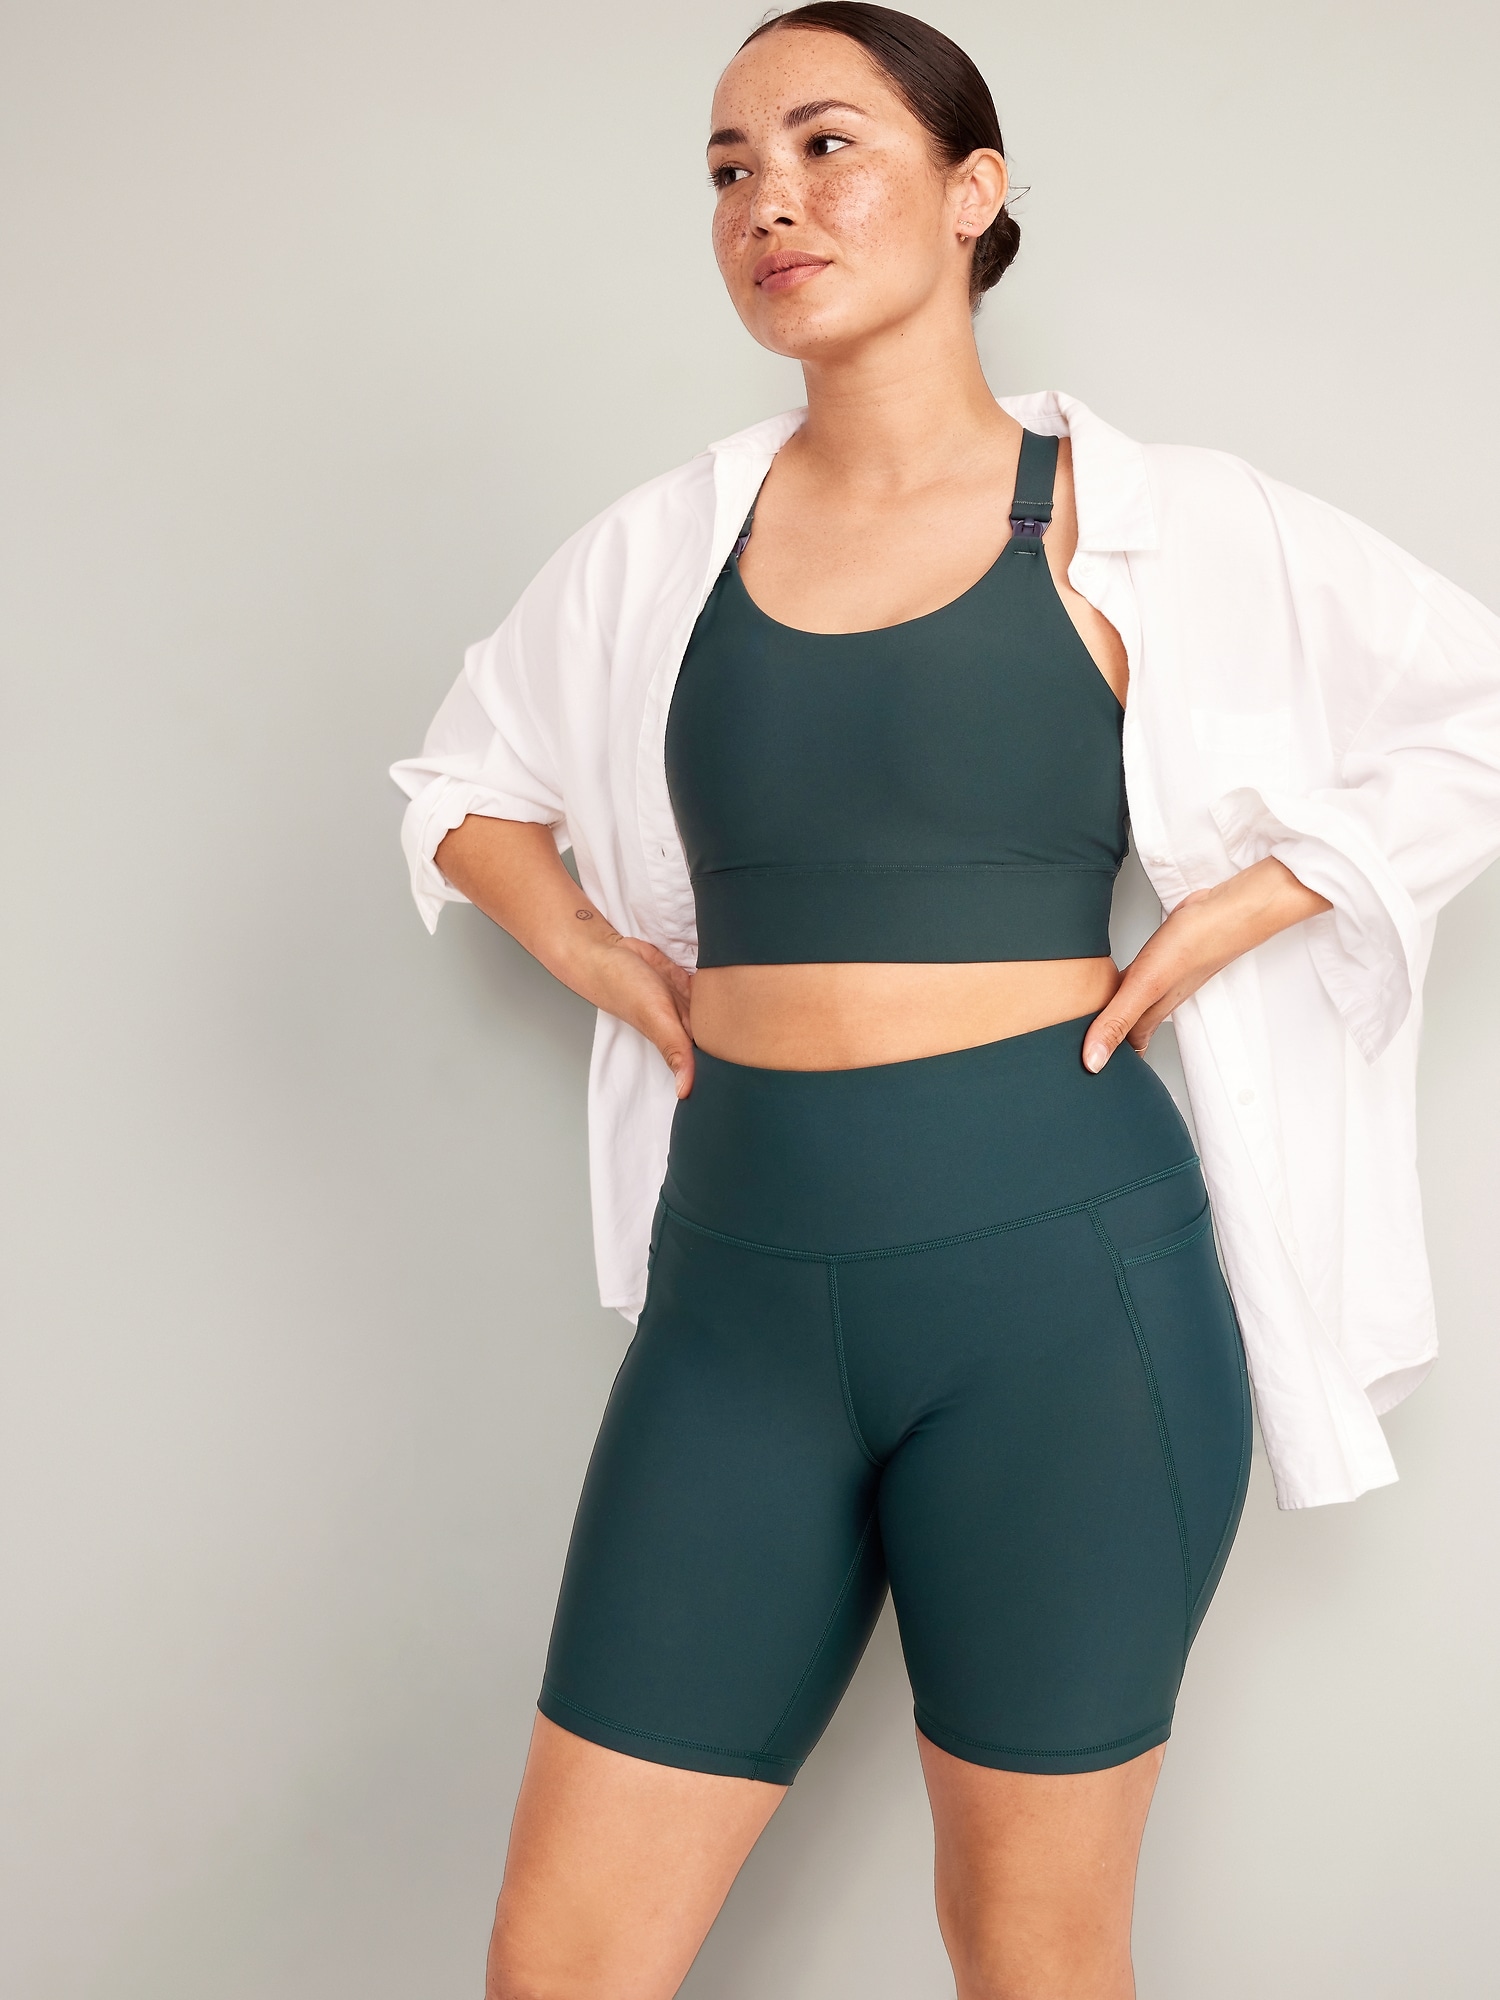 Save Over 77% Off Size-Inclusive Sports Bras at Nordstrom, Old Navy,  Athleta and More